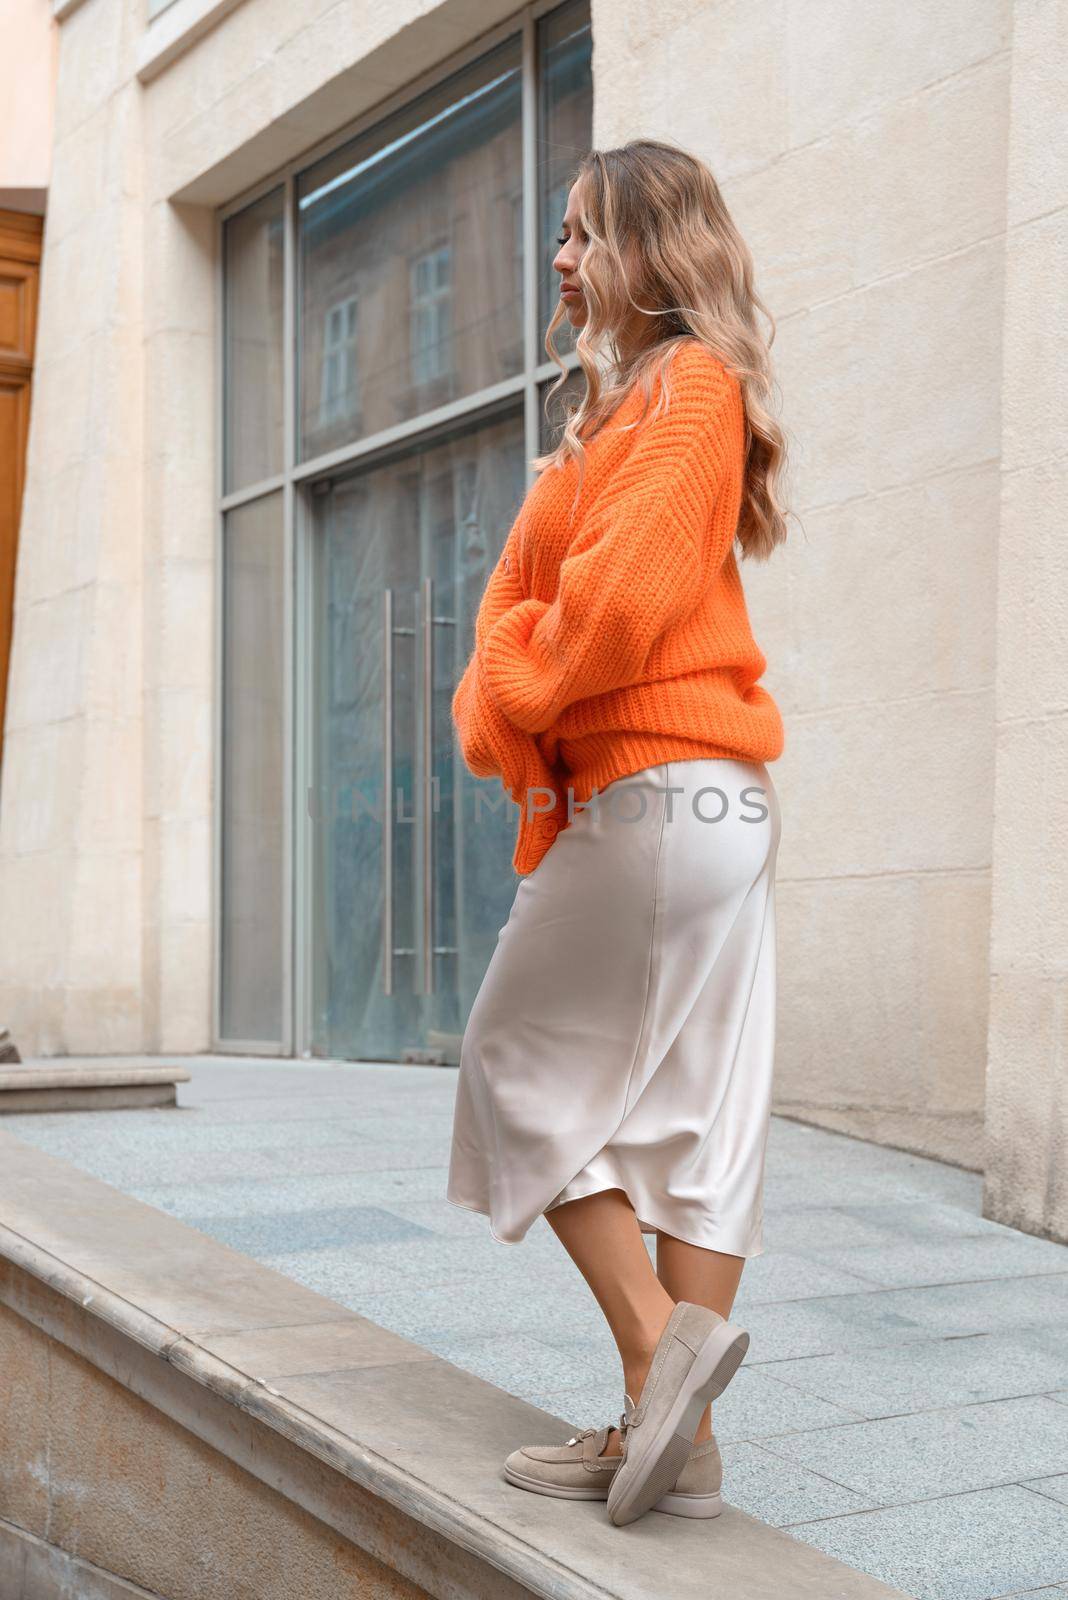 Portrait of fashionable women in orange sweater and beige dress posing in the street by Ashtray25